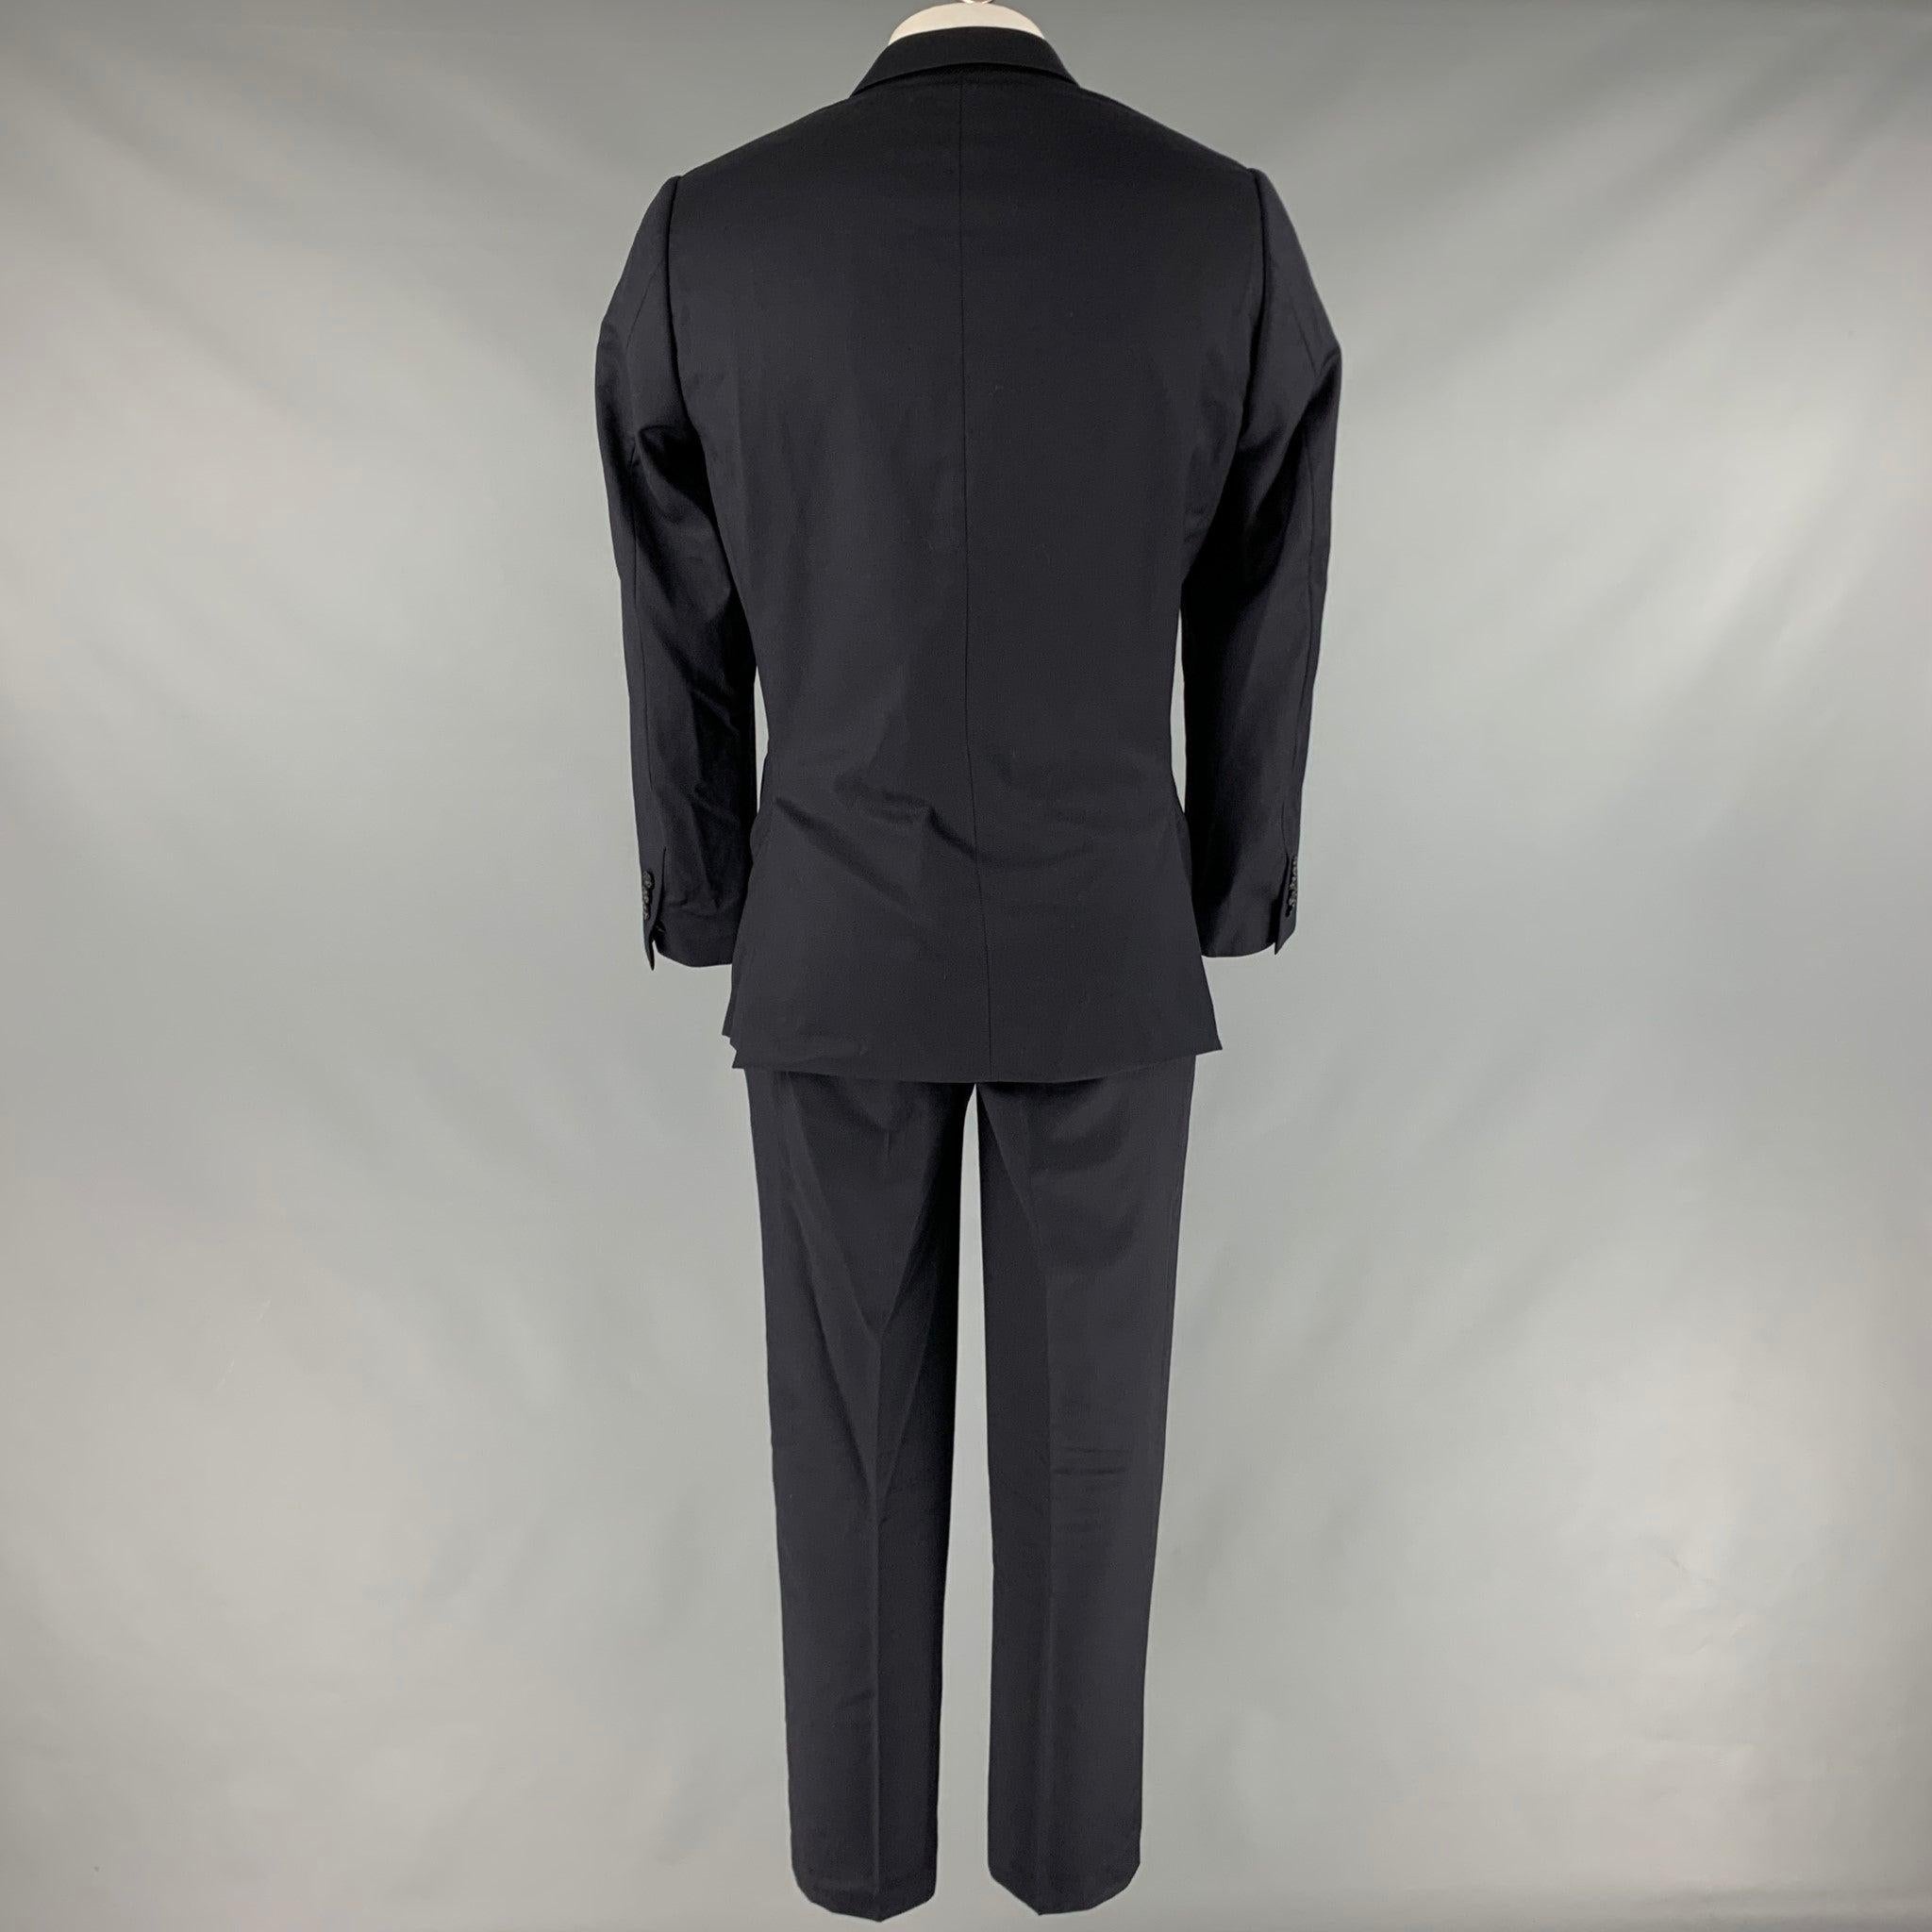 PAUL SMITH Size 42 Navy Wool Cashmere Notch Lapel Suit In Good Condition For Sale In San Francisco, CA